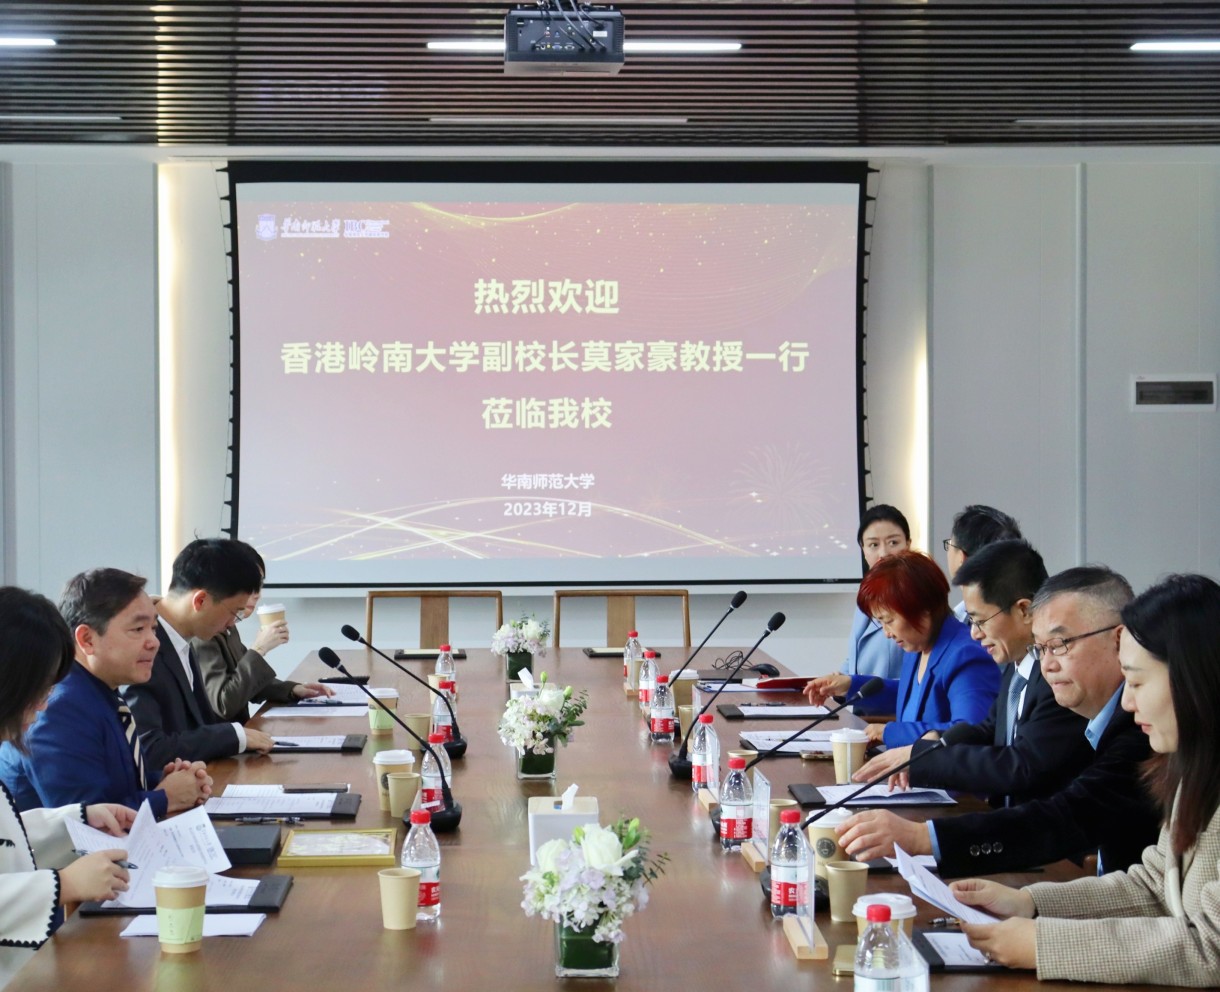 Lingnan University and South China Normal University sign co-operation agreement and inaugurate the Joint Cross-border Education Centre